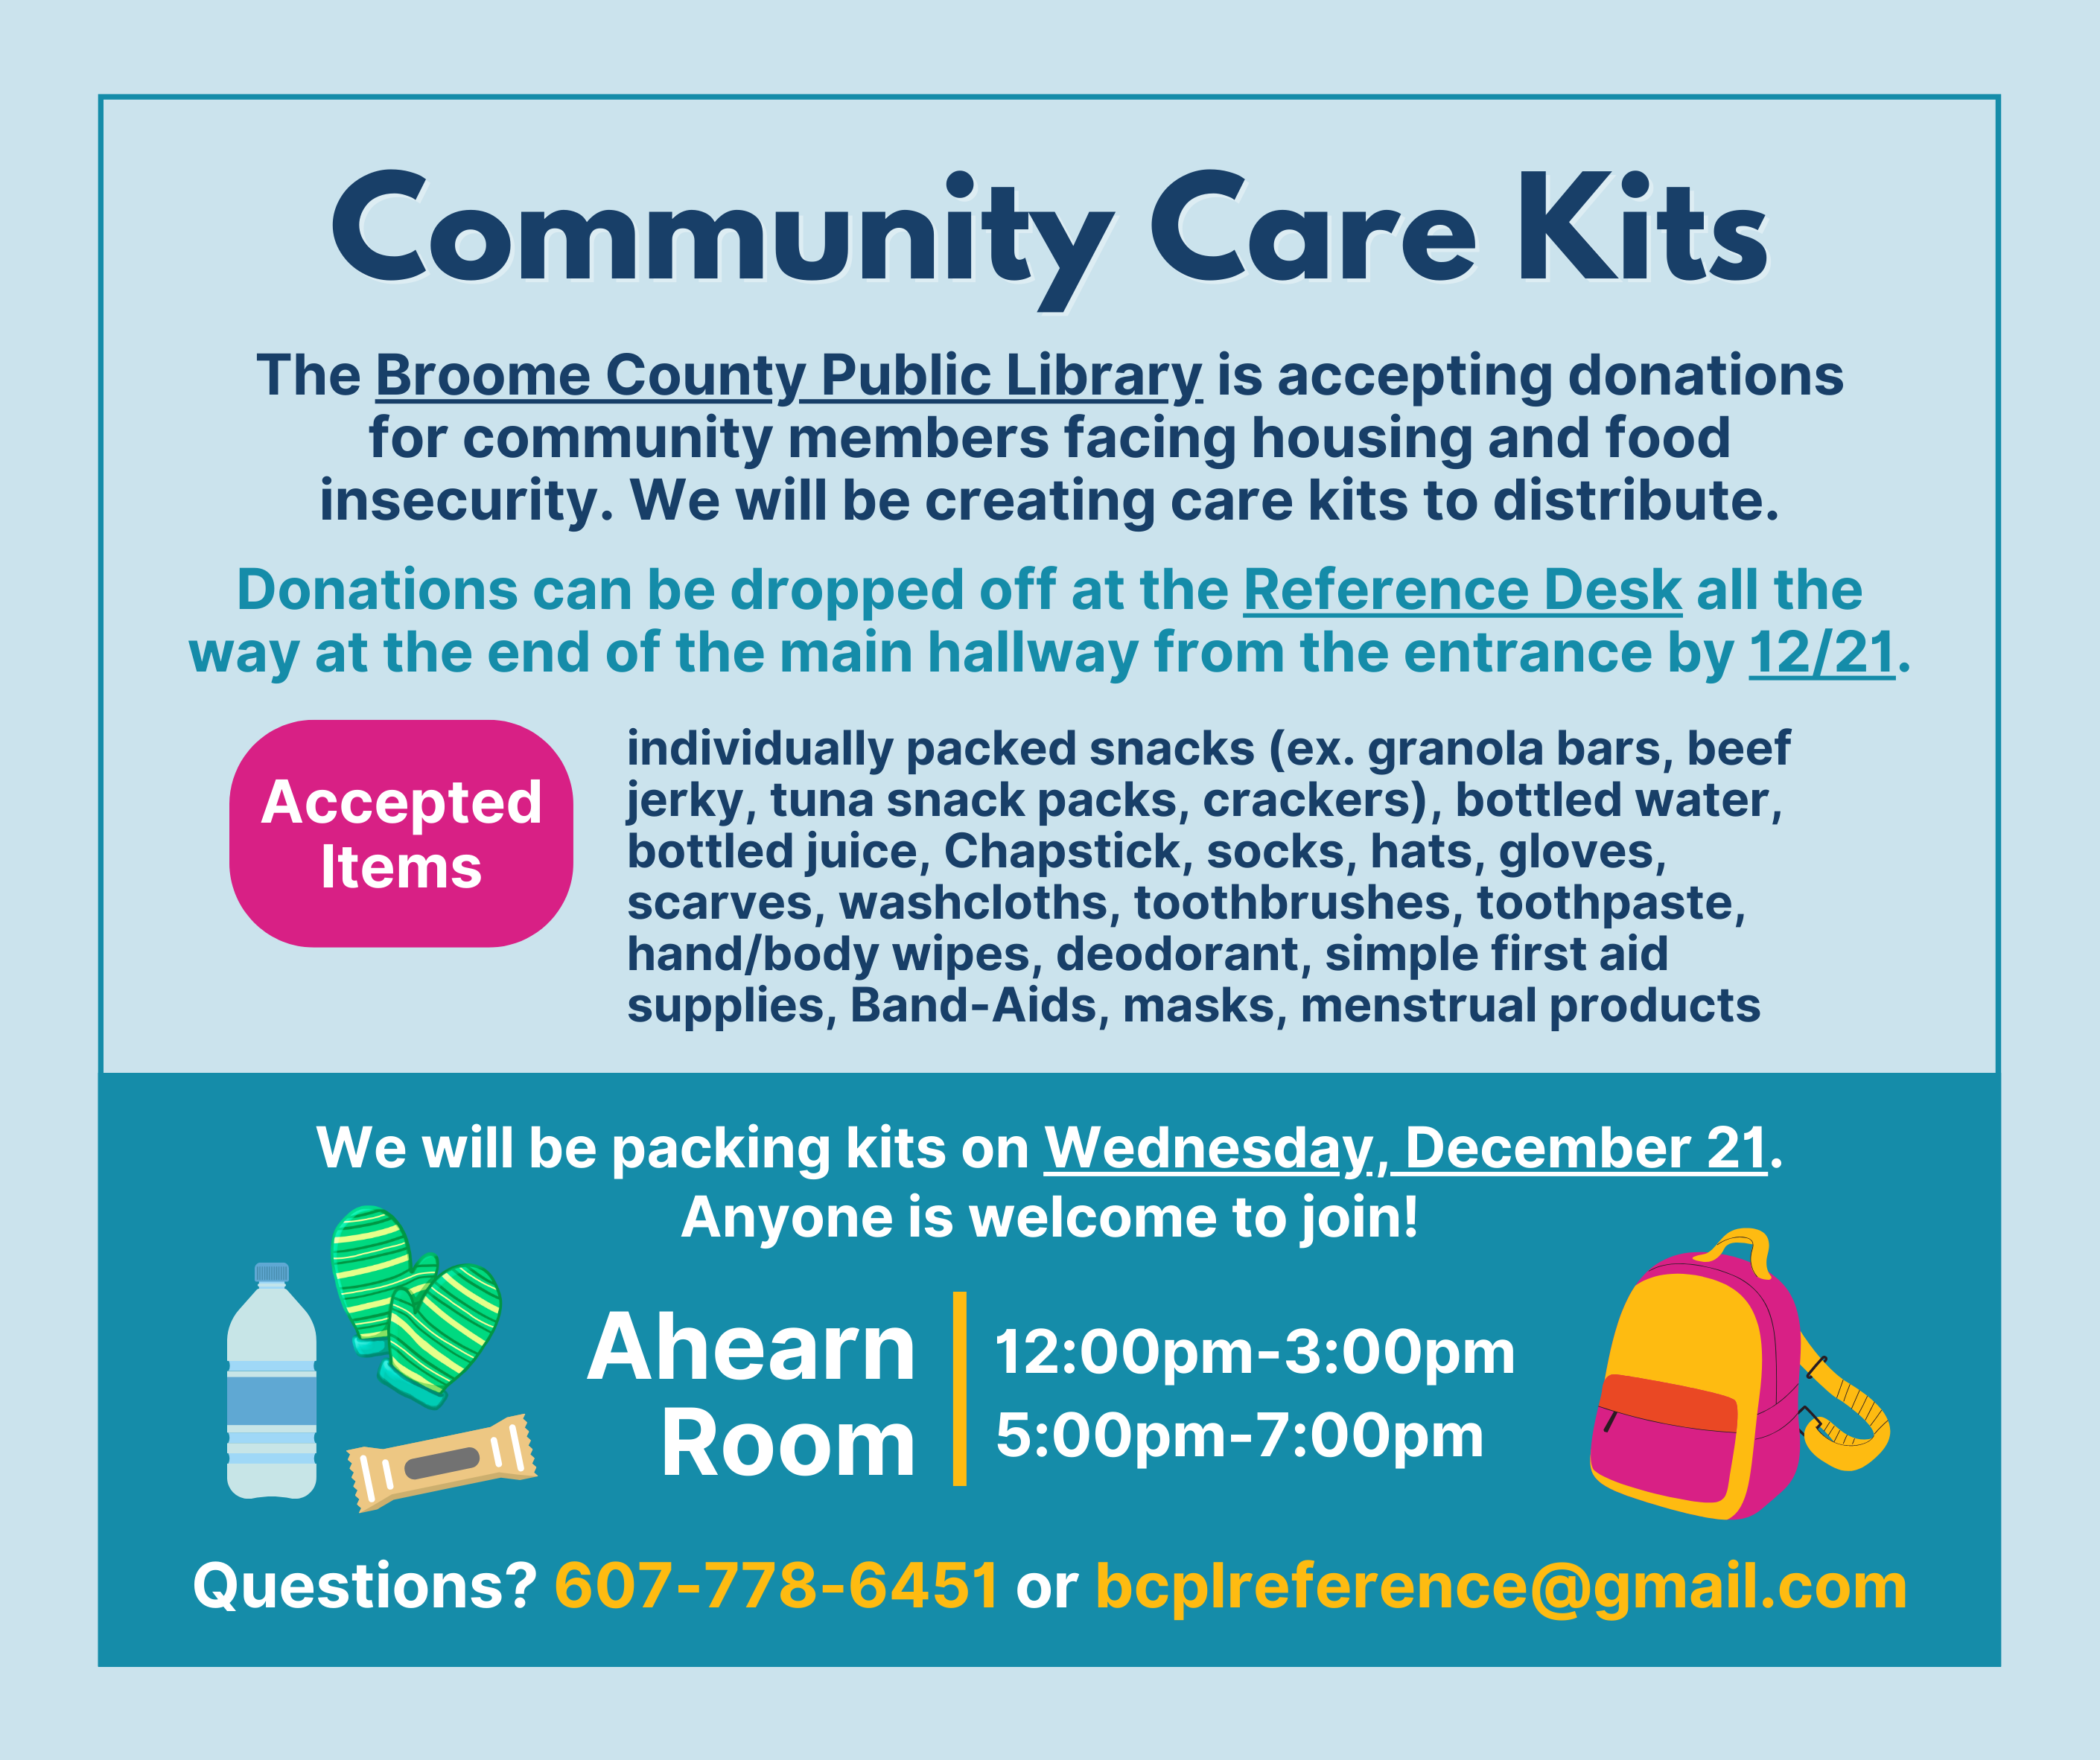 A post for community care kits. It says Community Care Kits at the top and then provides event details and donation details.